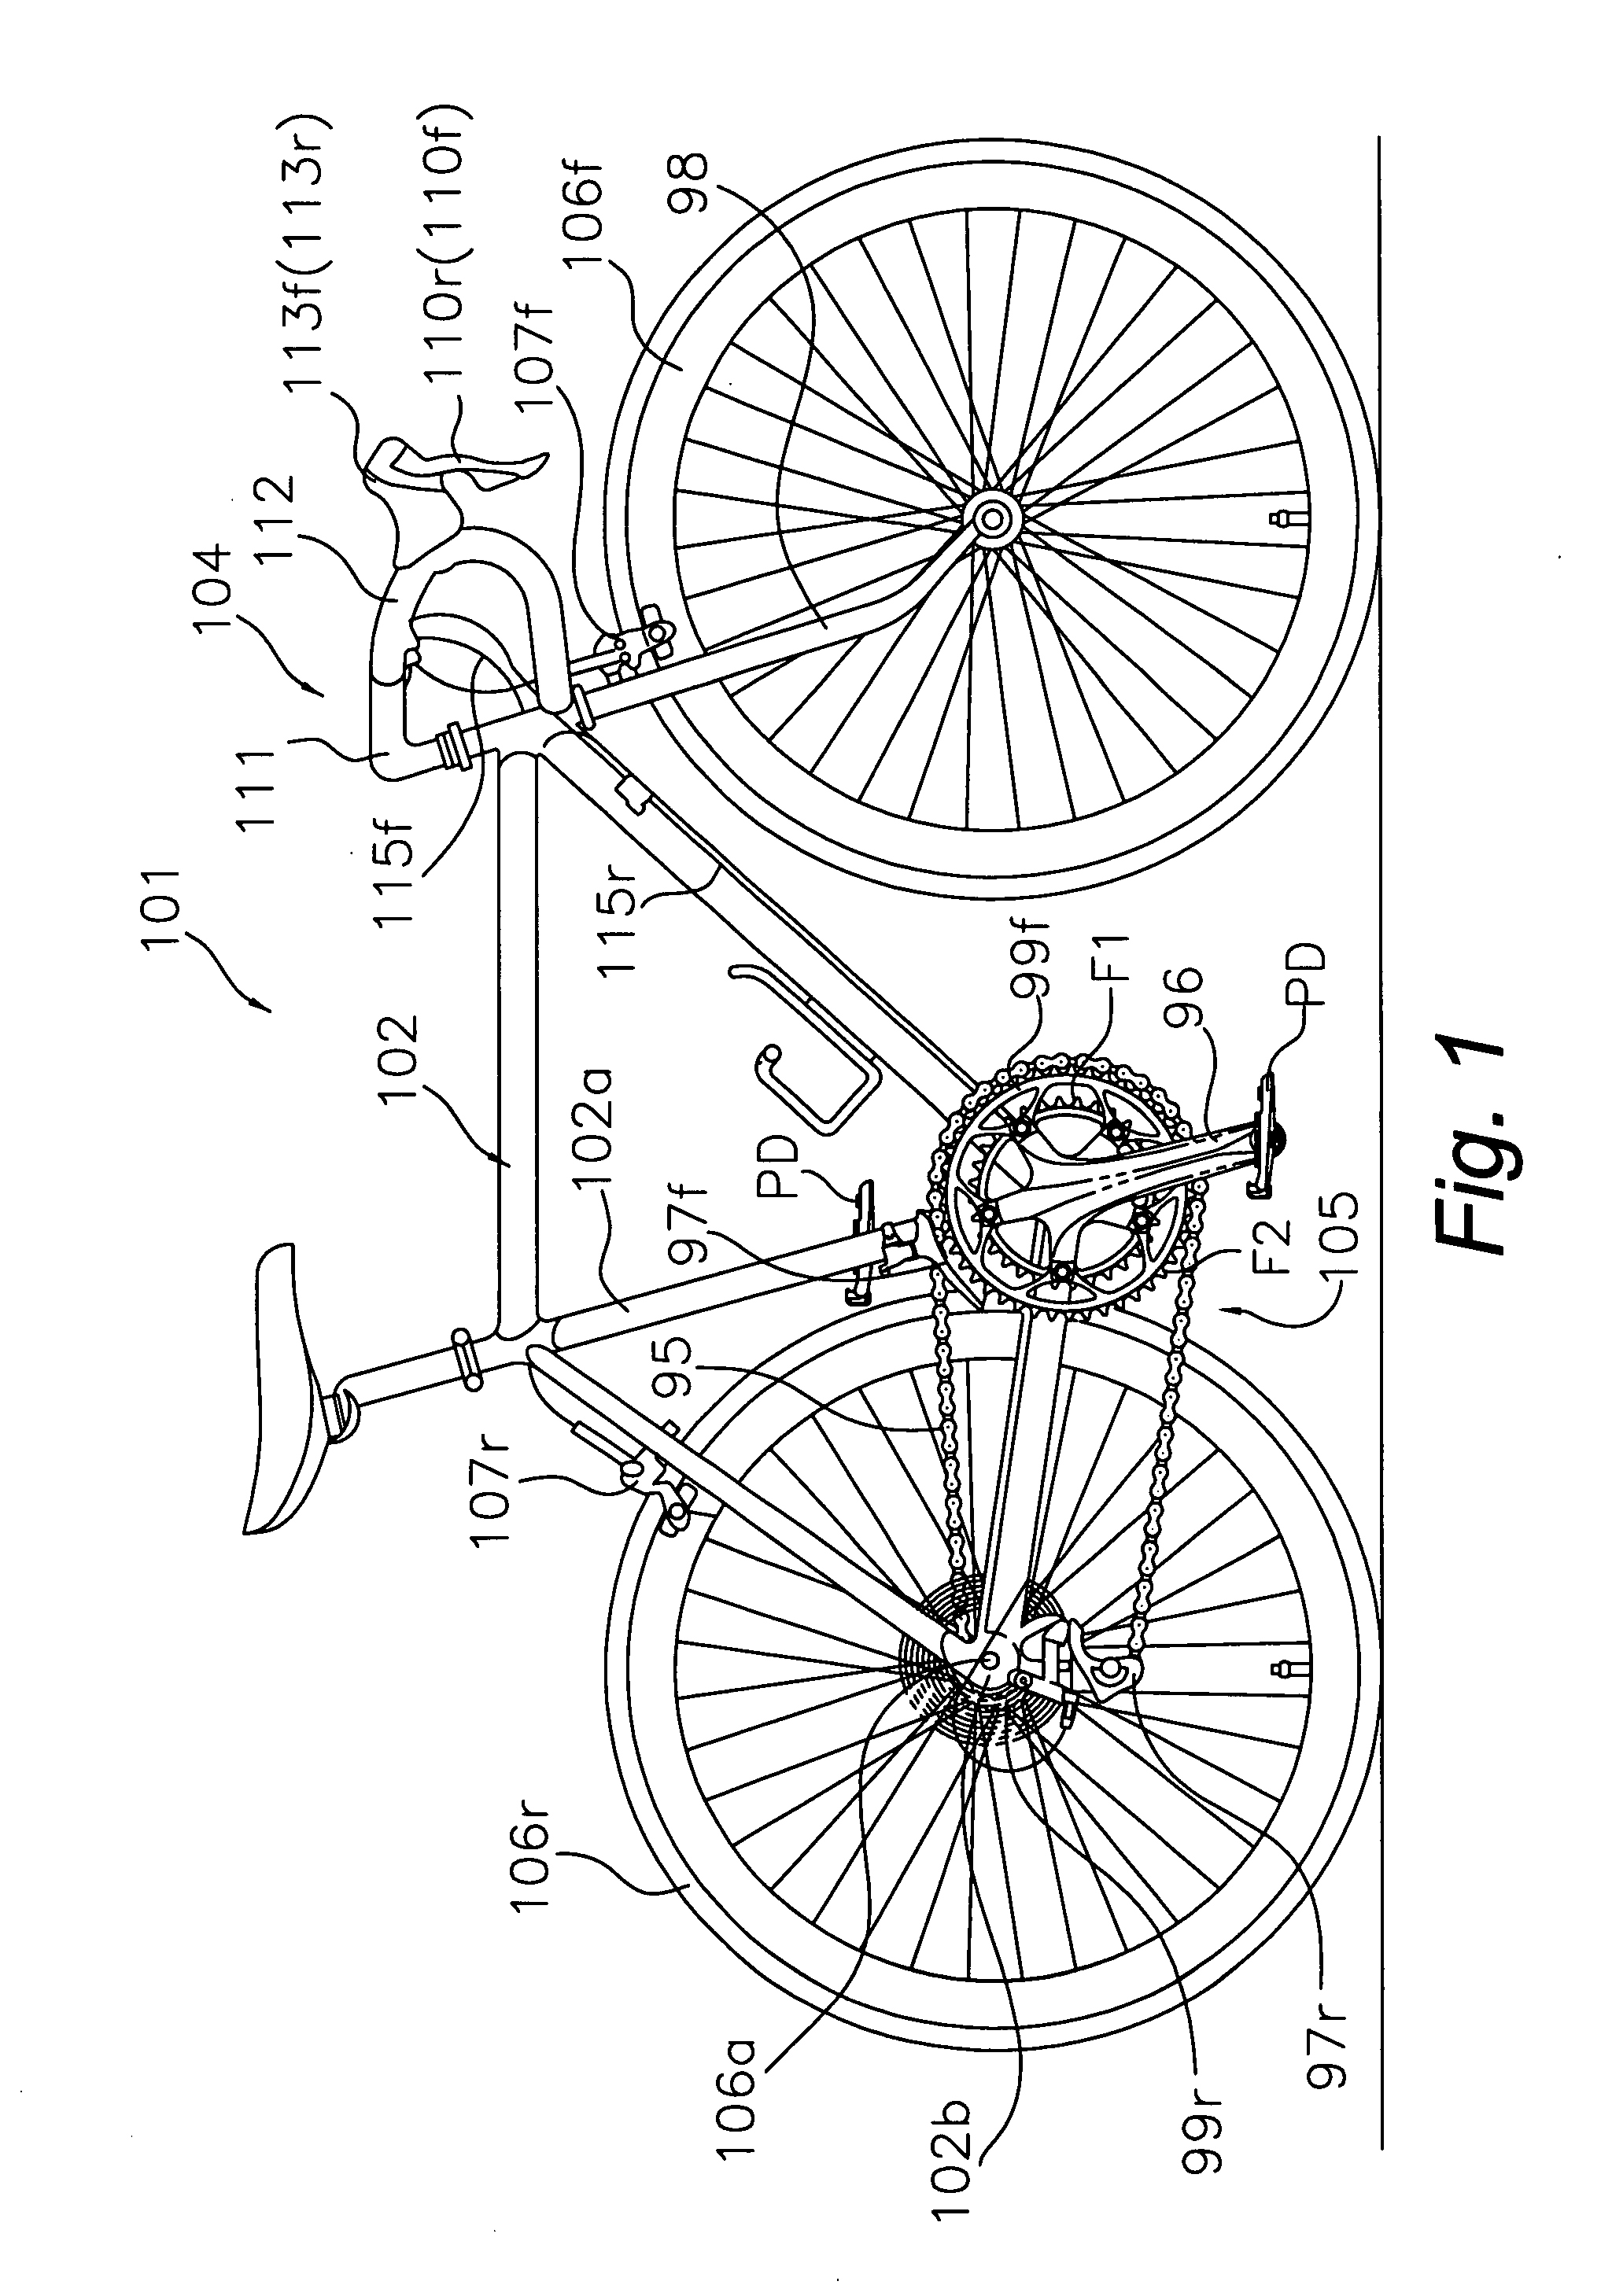 Front derailleur with mounting fixture